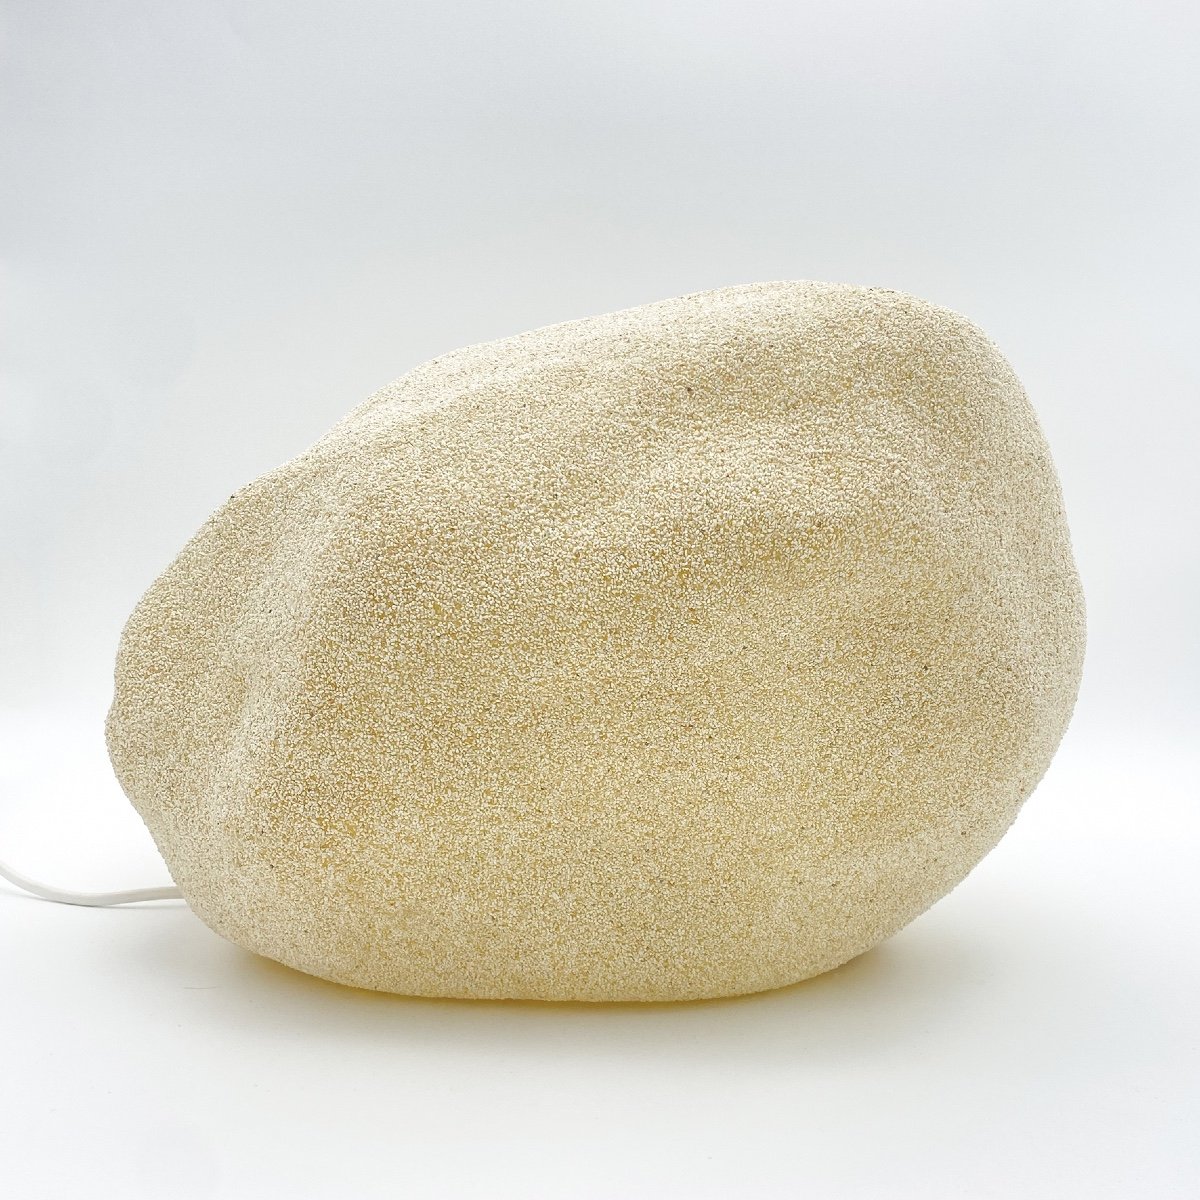 Stone Lamp By André Cazenave For Singleton